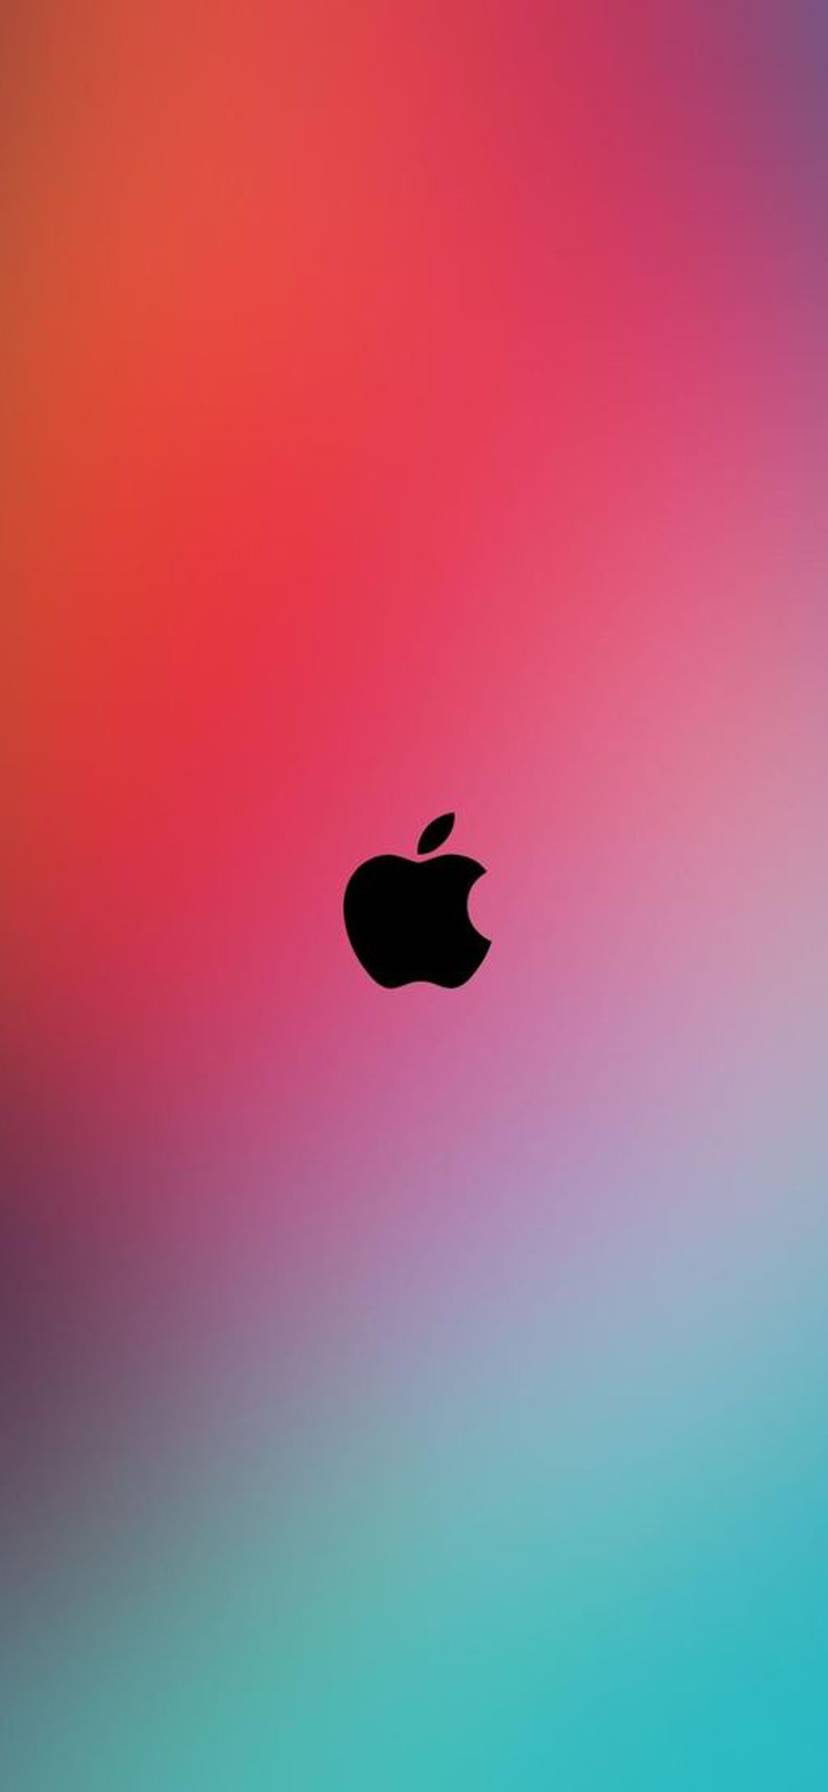 Simple Apple logo hd iPhone Wallpapers and Background